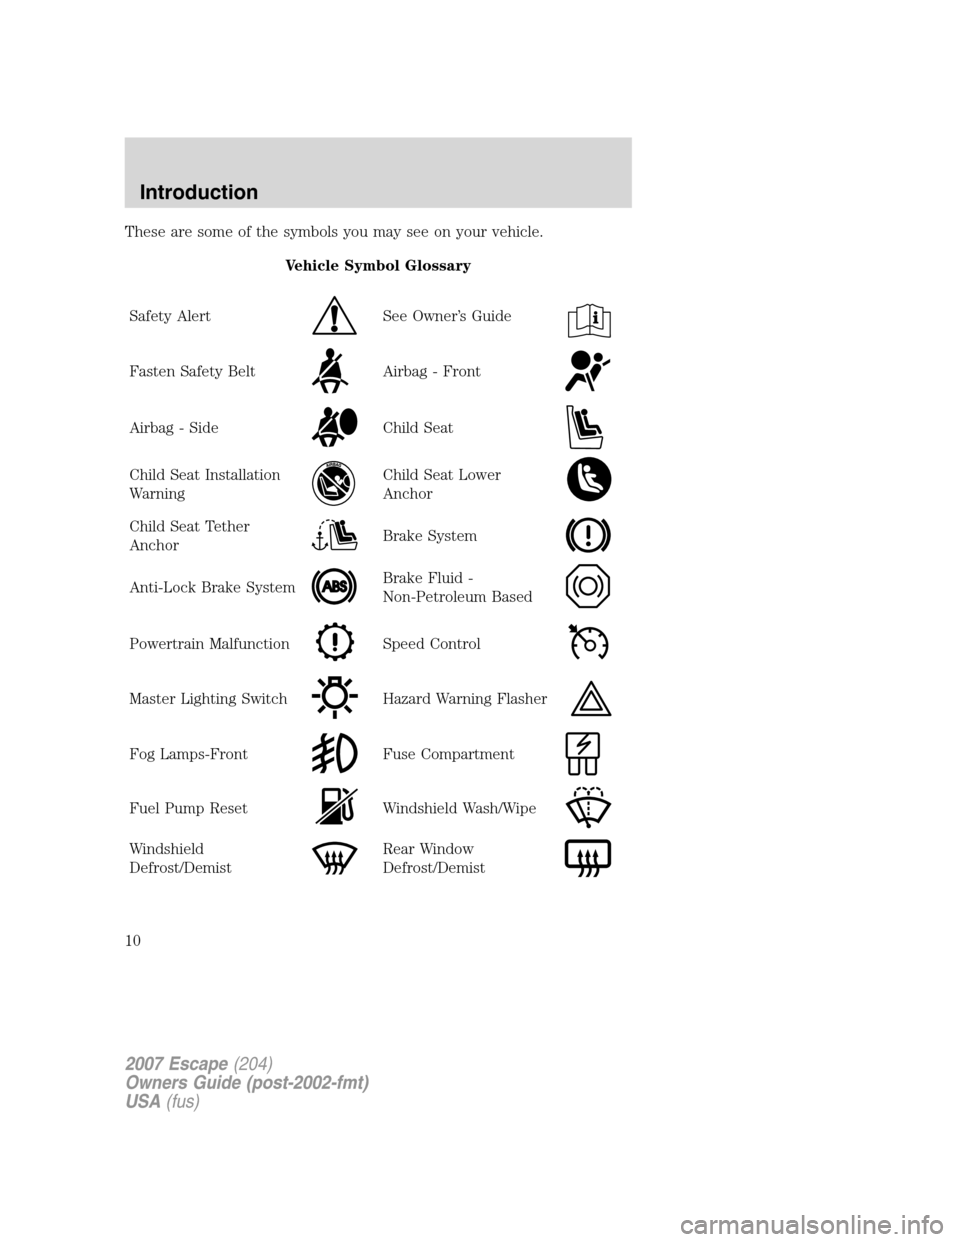 FORD ESCAPE 2007 2.G Owners Manual These are some of the symbols you may see on your vehicle.
Vehicle Symbol Glossary
Safety Alert
See Owner’s Guide
Fasten Safety BeltAirbag - Front
Airbag - SideChild Seat
Child Seat Installation
War